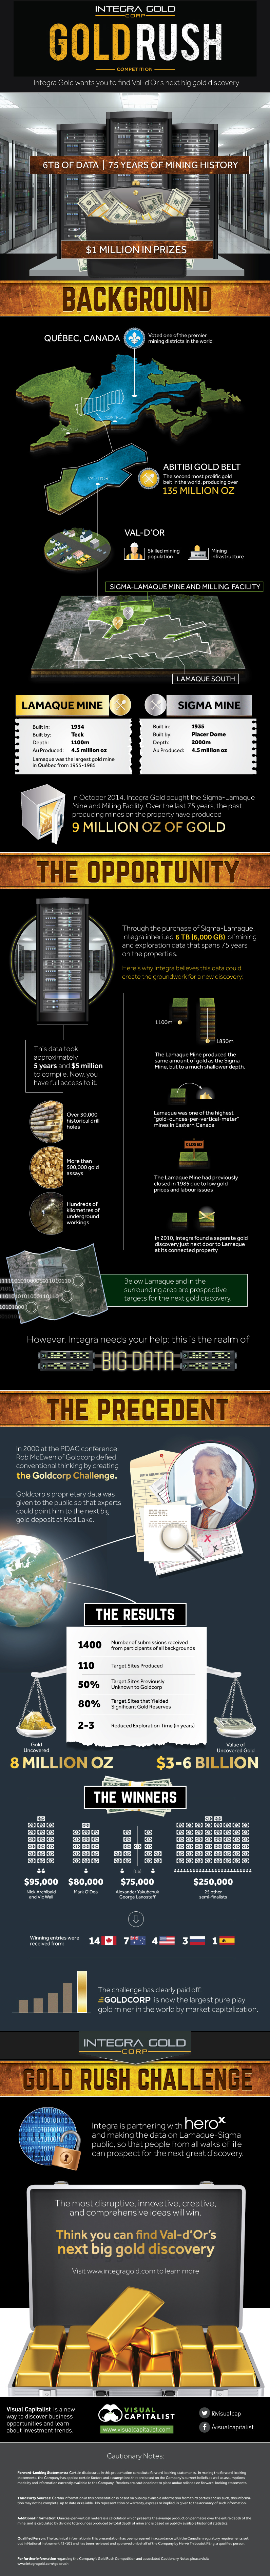 Integra Gold Launches $1 Million Challenge to Find Next Gold Discovery